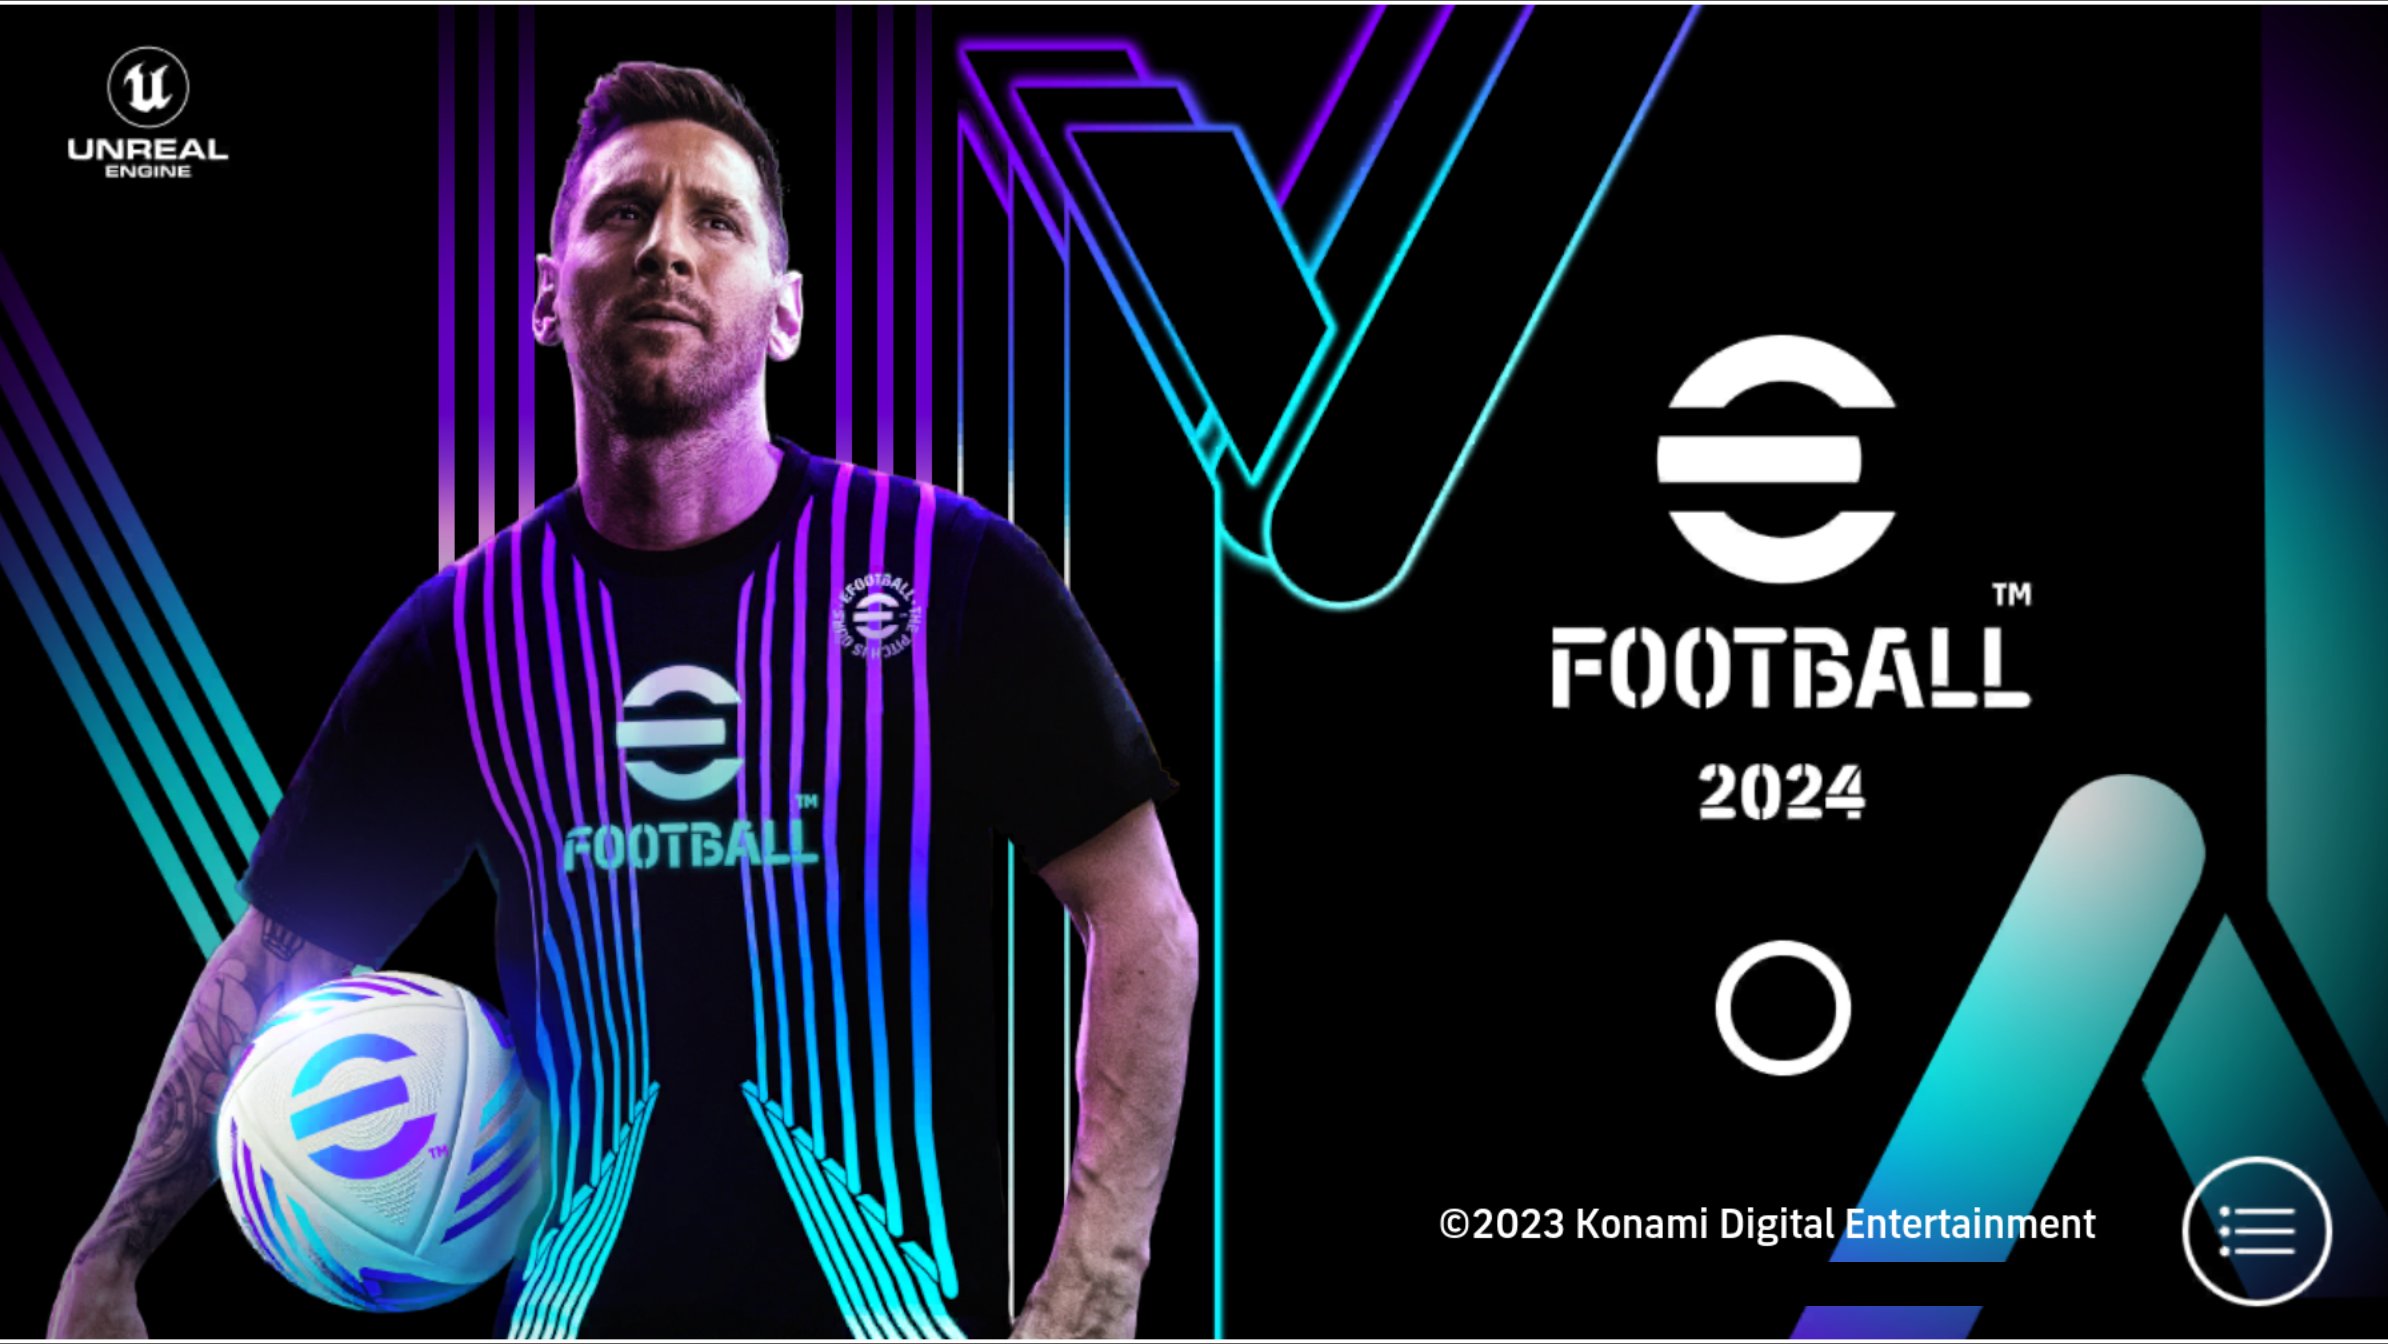 eFootball release date, cross-play, licenses, and more